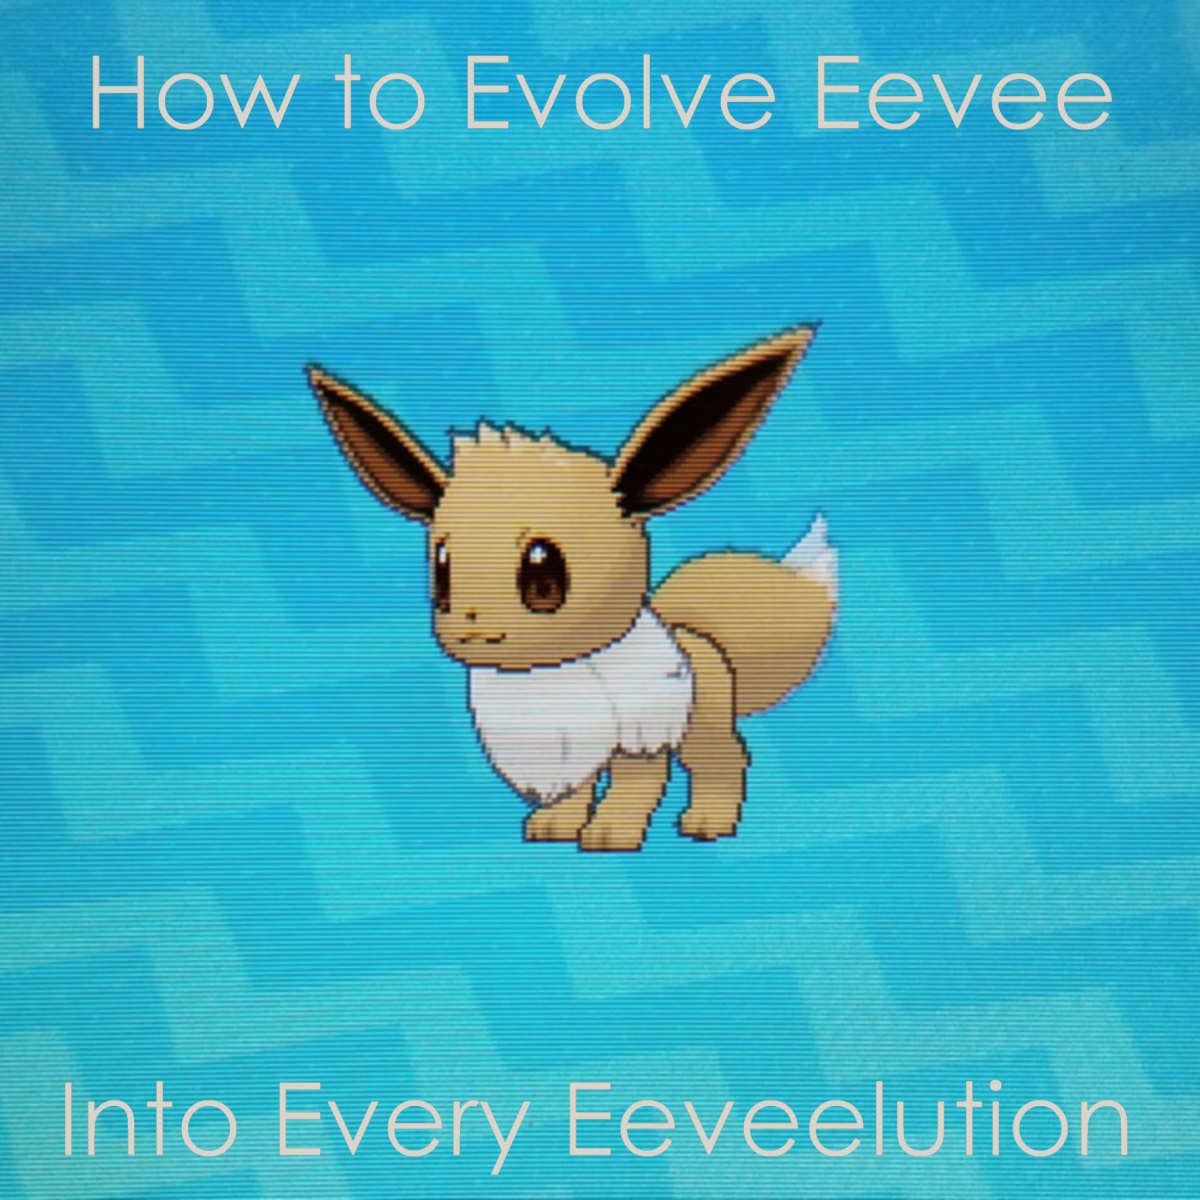 HOW TO GET EEVEE AND ALL EEVEE'S EVOLUTIONS IN POKÉMON FIRE RED